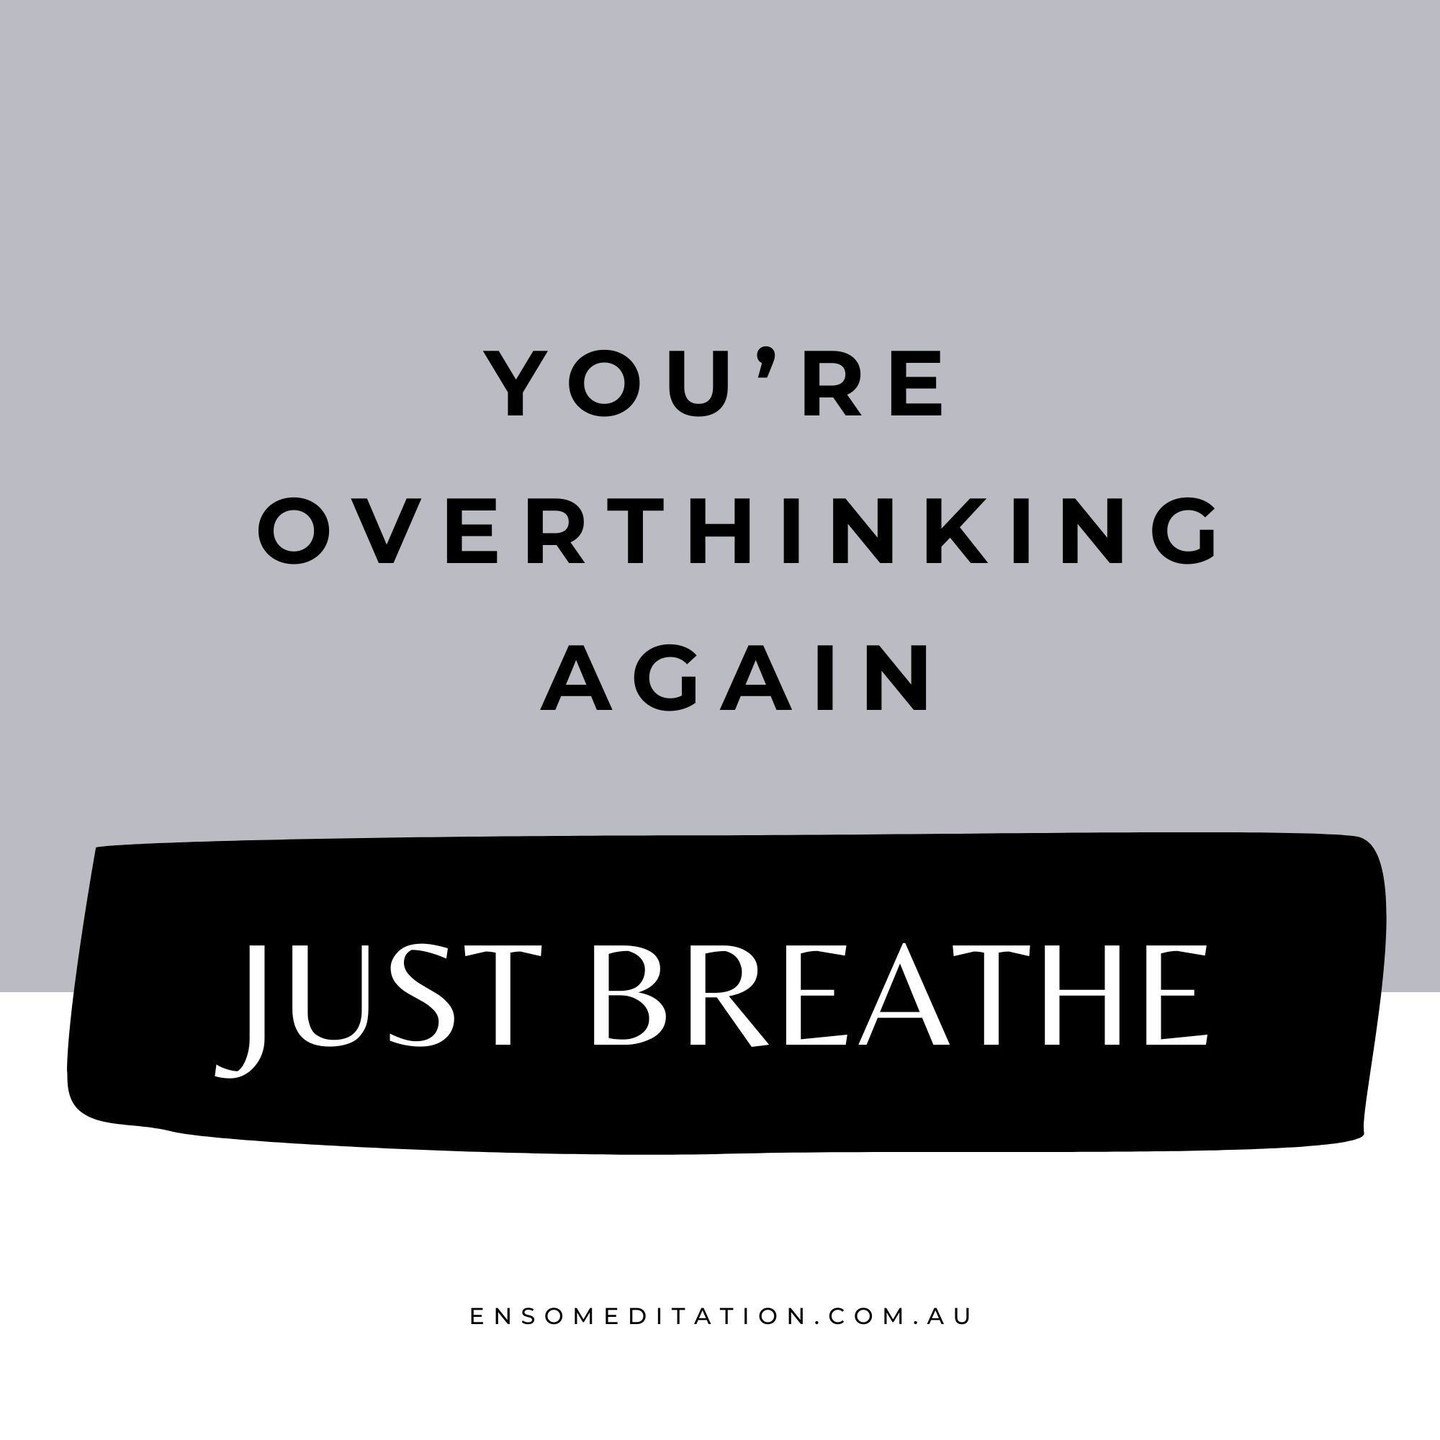 Caught up in the whirlwind of thoughts? It happens to the best of us. Sometimes, all it takes is a gentle reminder: You're overthinking again. Just breathe. 

Taking a deep breath is about giving your mind that much-needed break. Let that moment of b